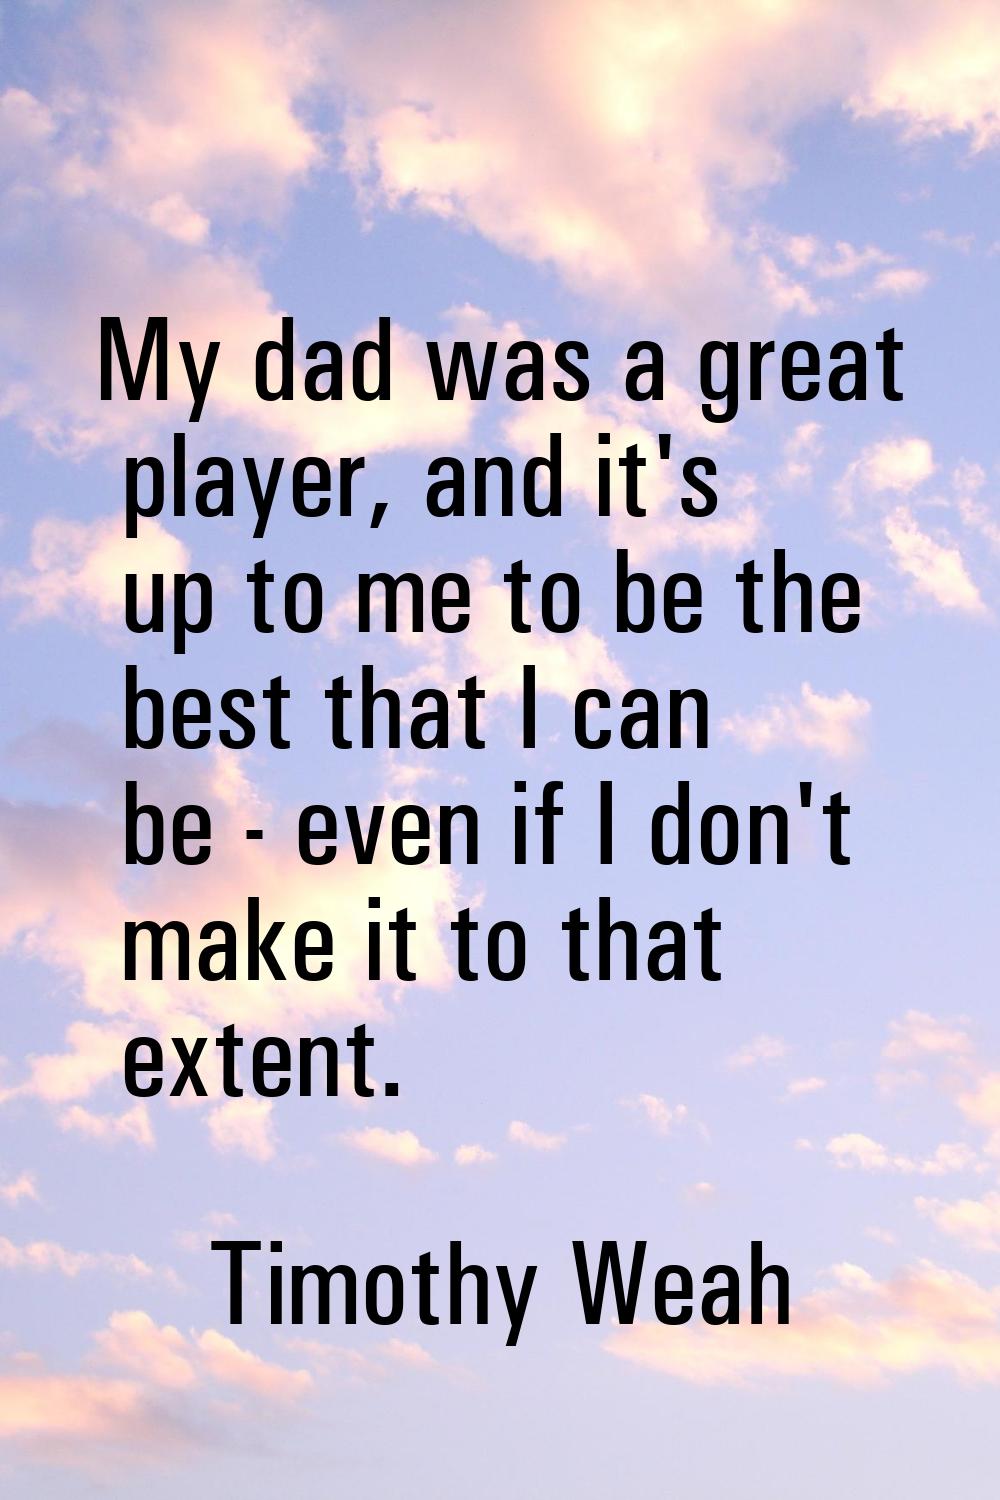 My dad was a great player, and it's up to me to be the best that I can be - even if I don't make it